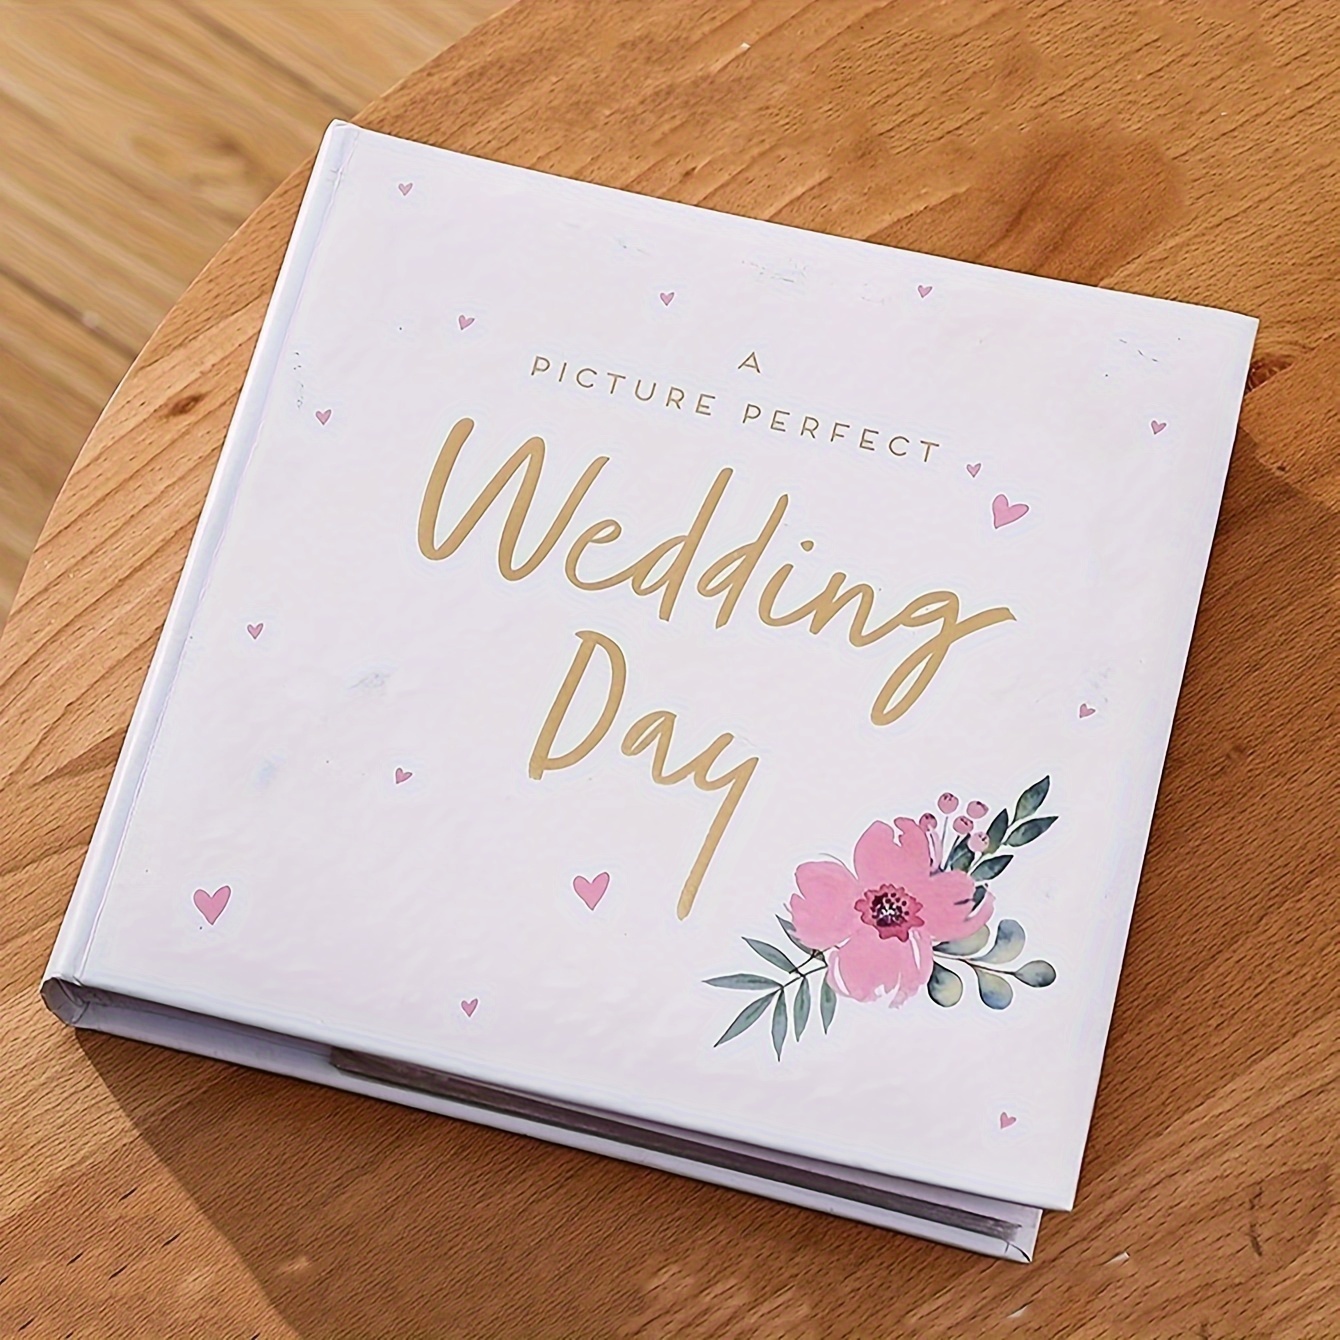 

Picture Perfect Wedding Day: 6x14 Page Wedding Memory Book - A Keepsake Album For Your Special Day